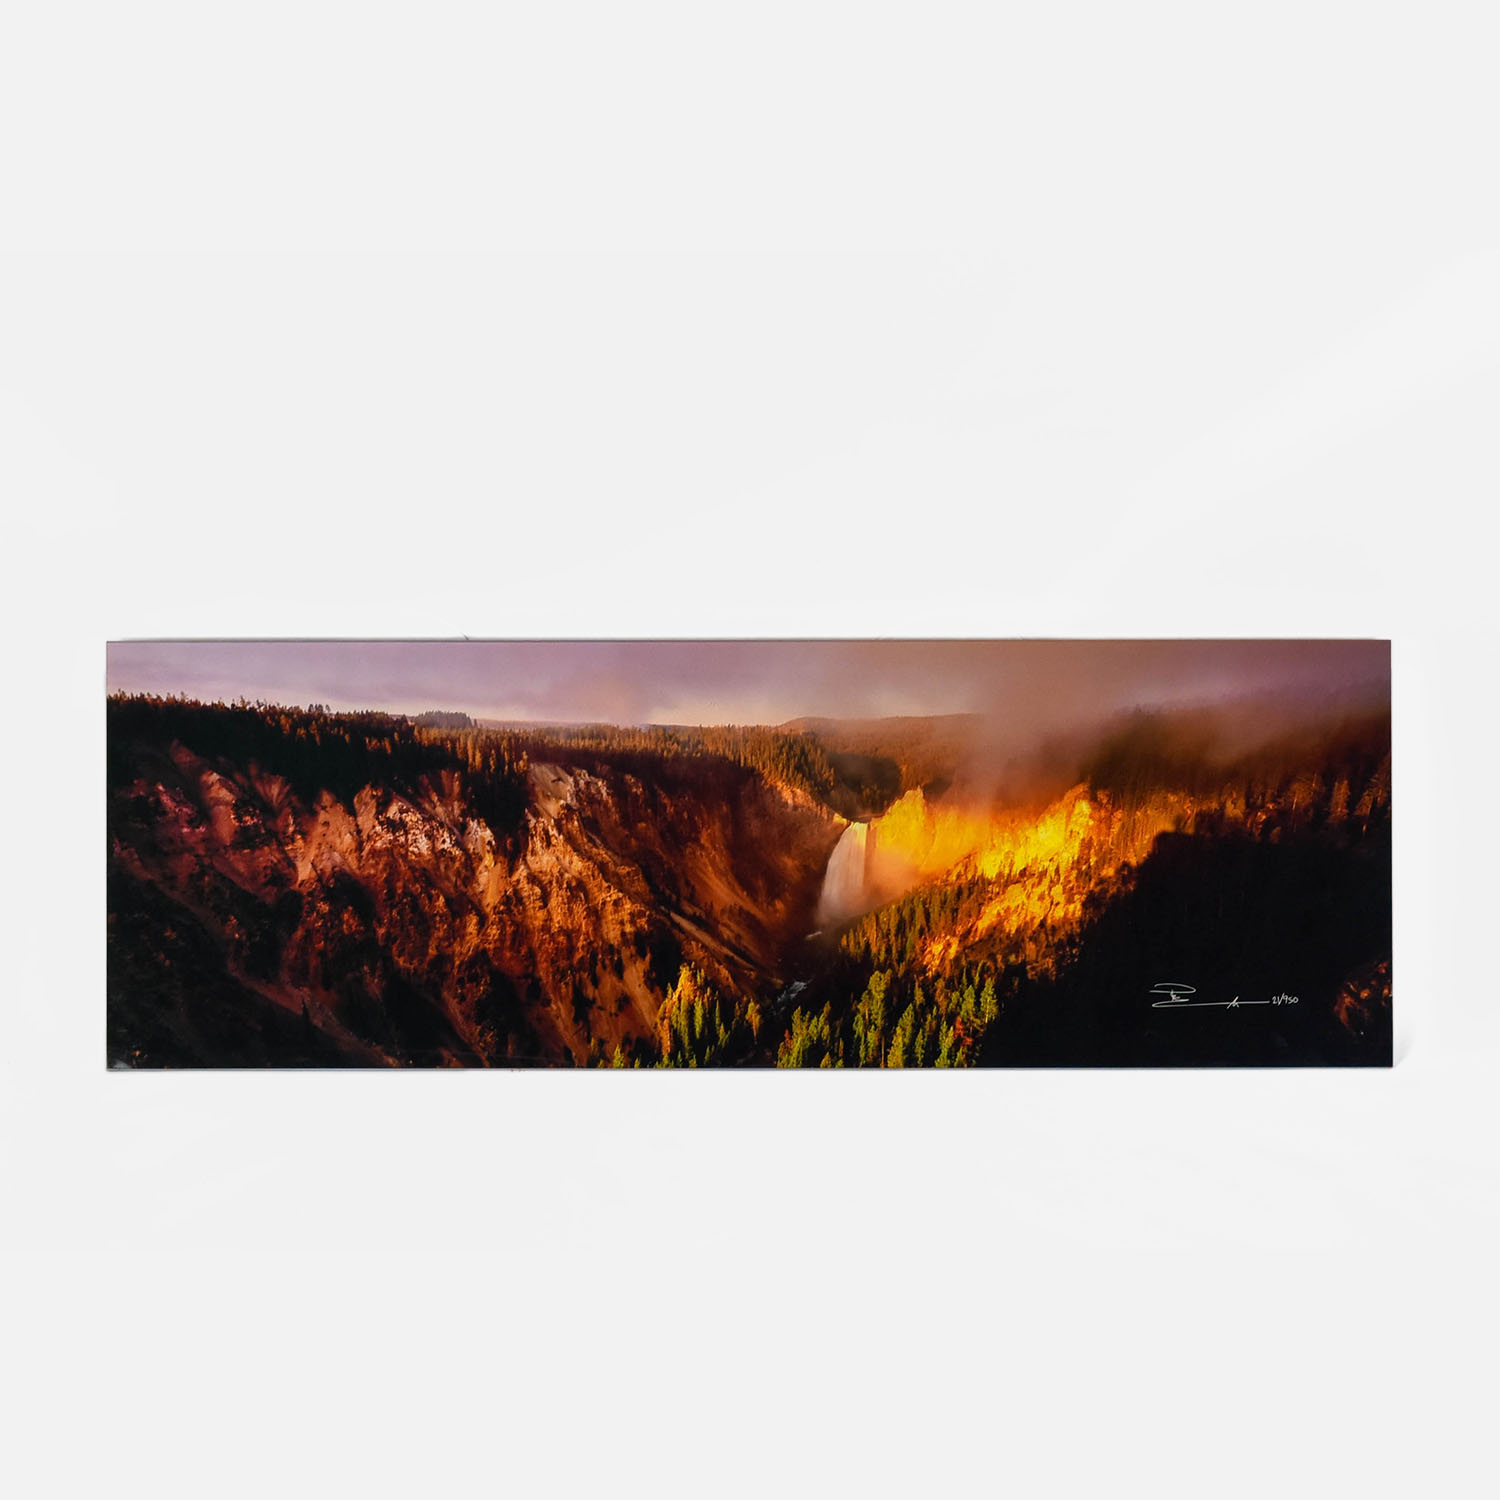 Lik, Peter Landscape Photograph on Acrylic Waterfall Forest Fire 21/950